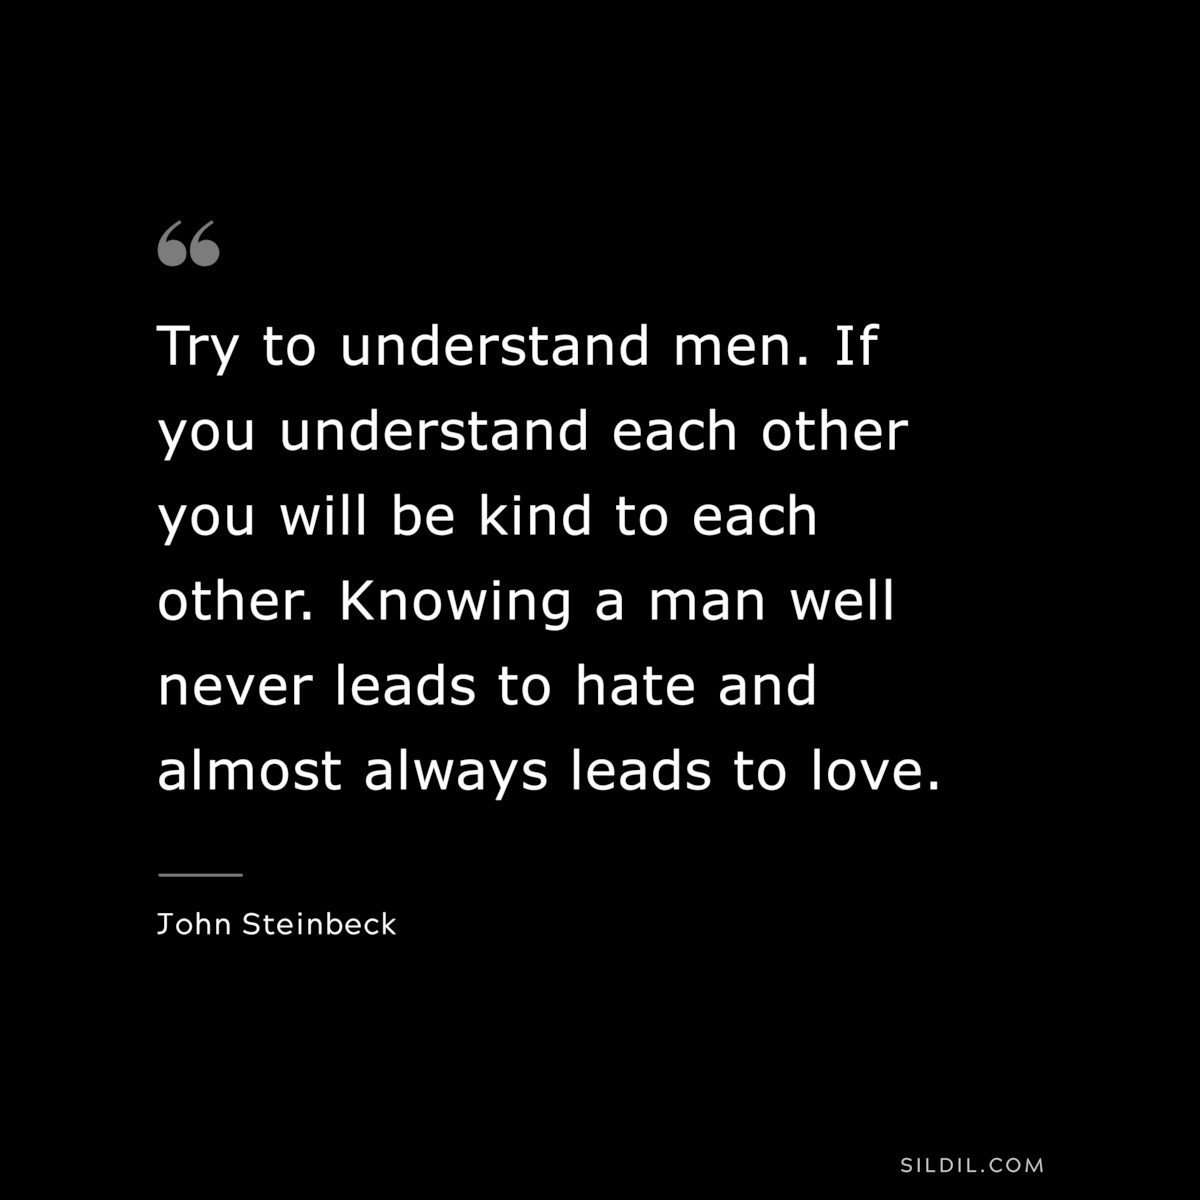 Try to understand men. If you understand each other you will be kind to each other. Knowing a man well never leads to hate and almost always leads to love.― John Steinbeck